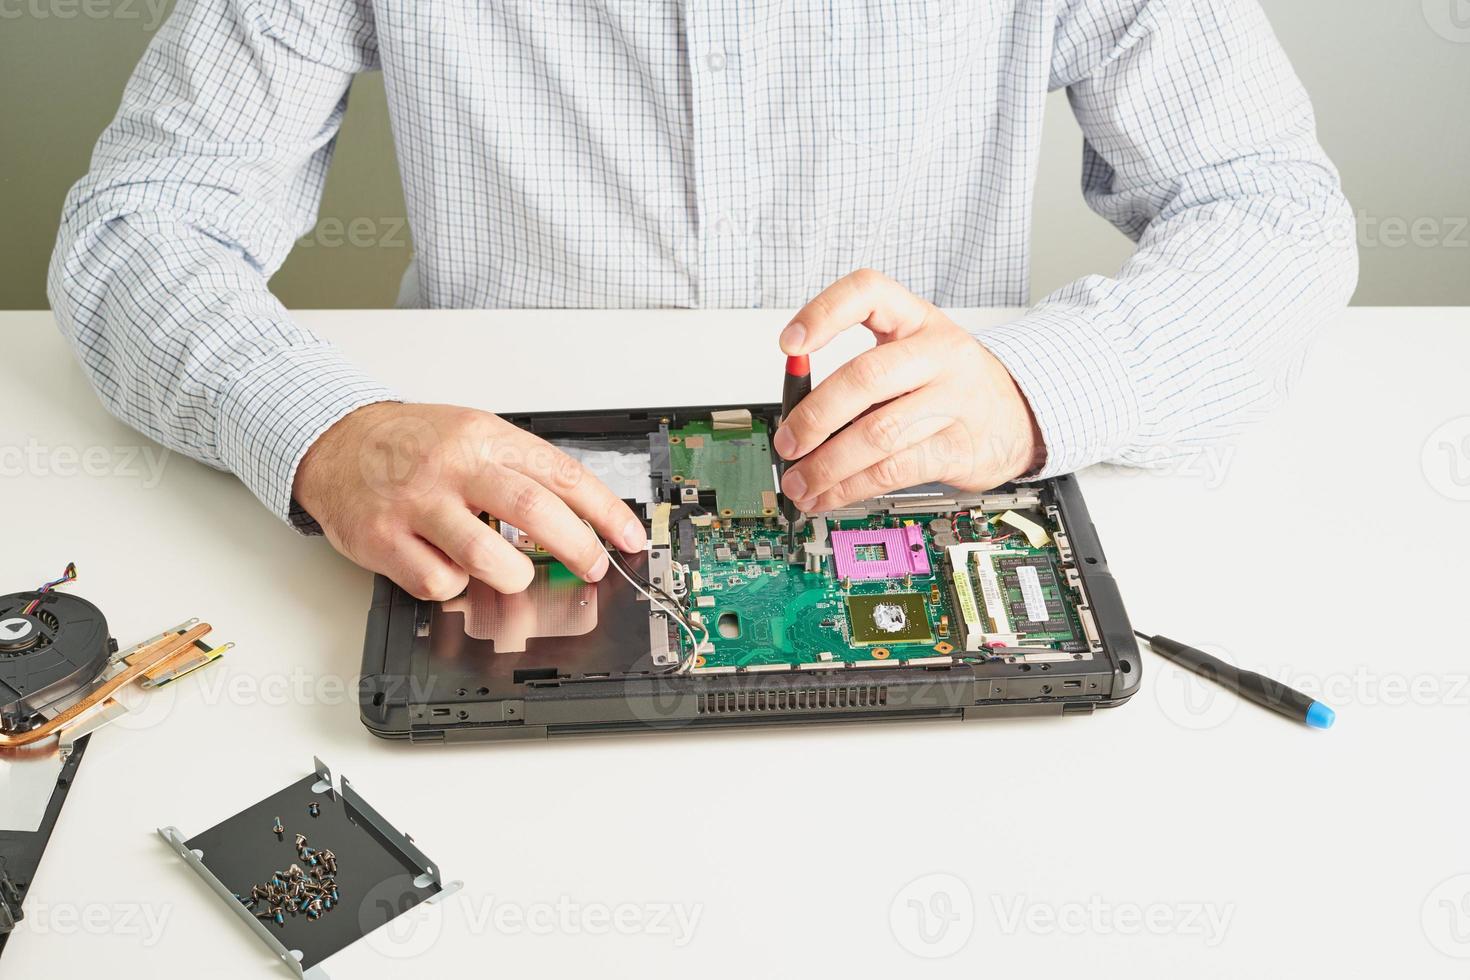 Man repairs computer. A service engineer in shirt repairs laptop, at white Desk against white wall. photo